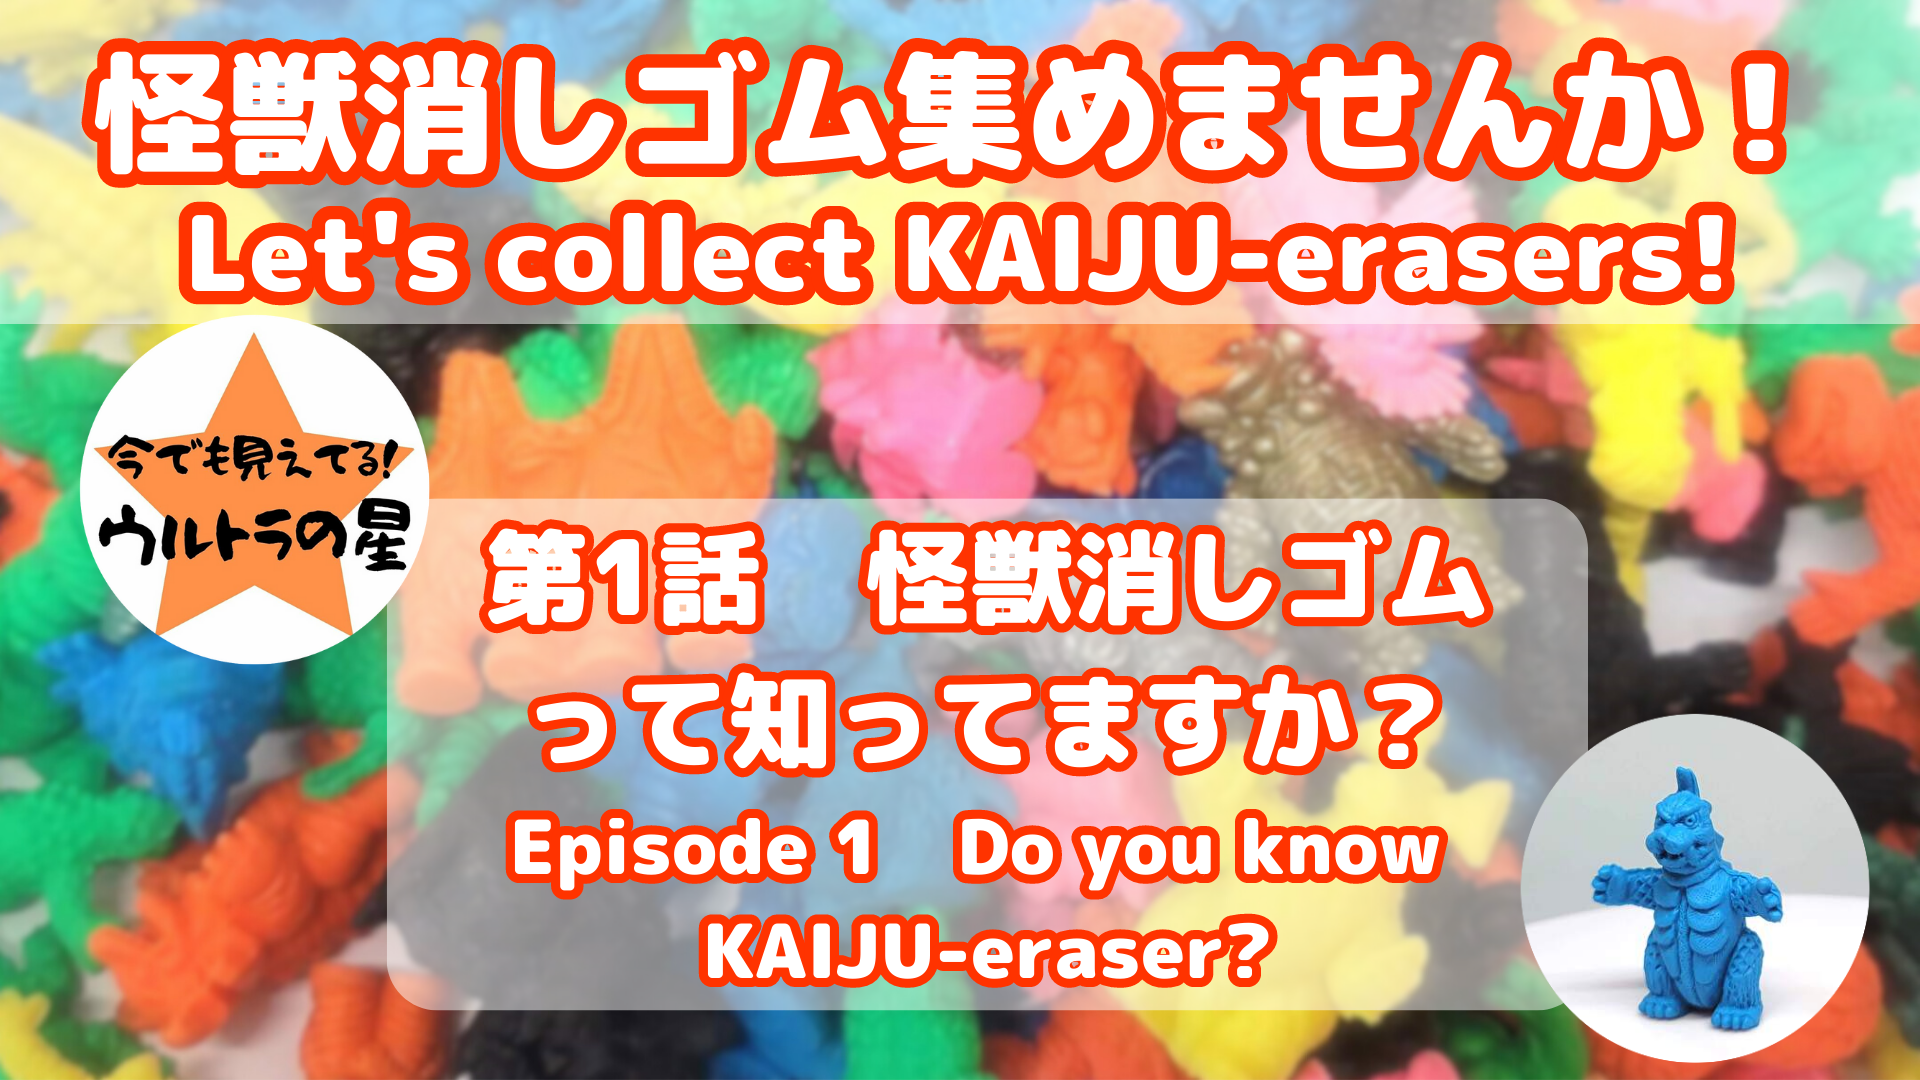 Let's collect KAIJU-erasers!